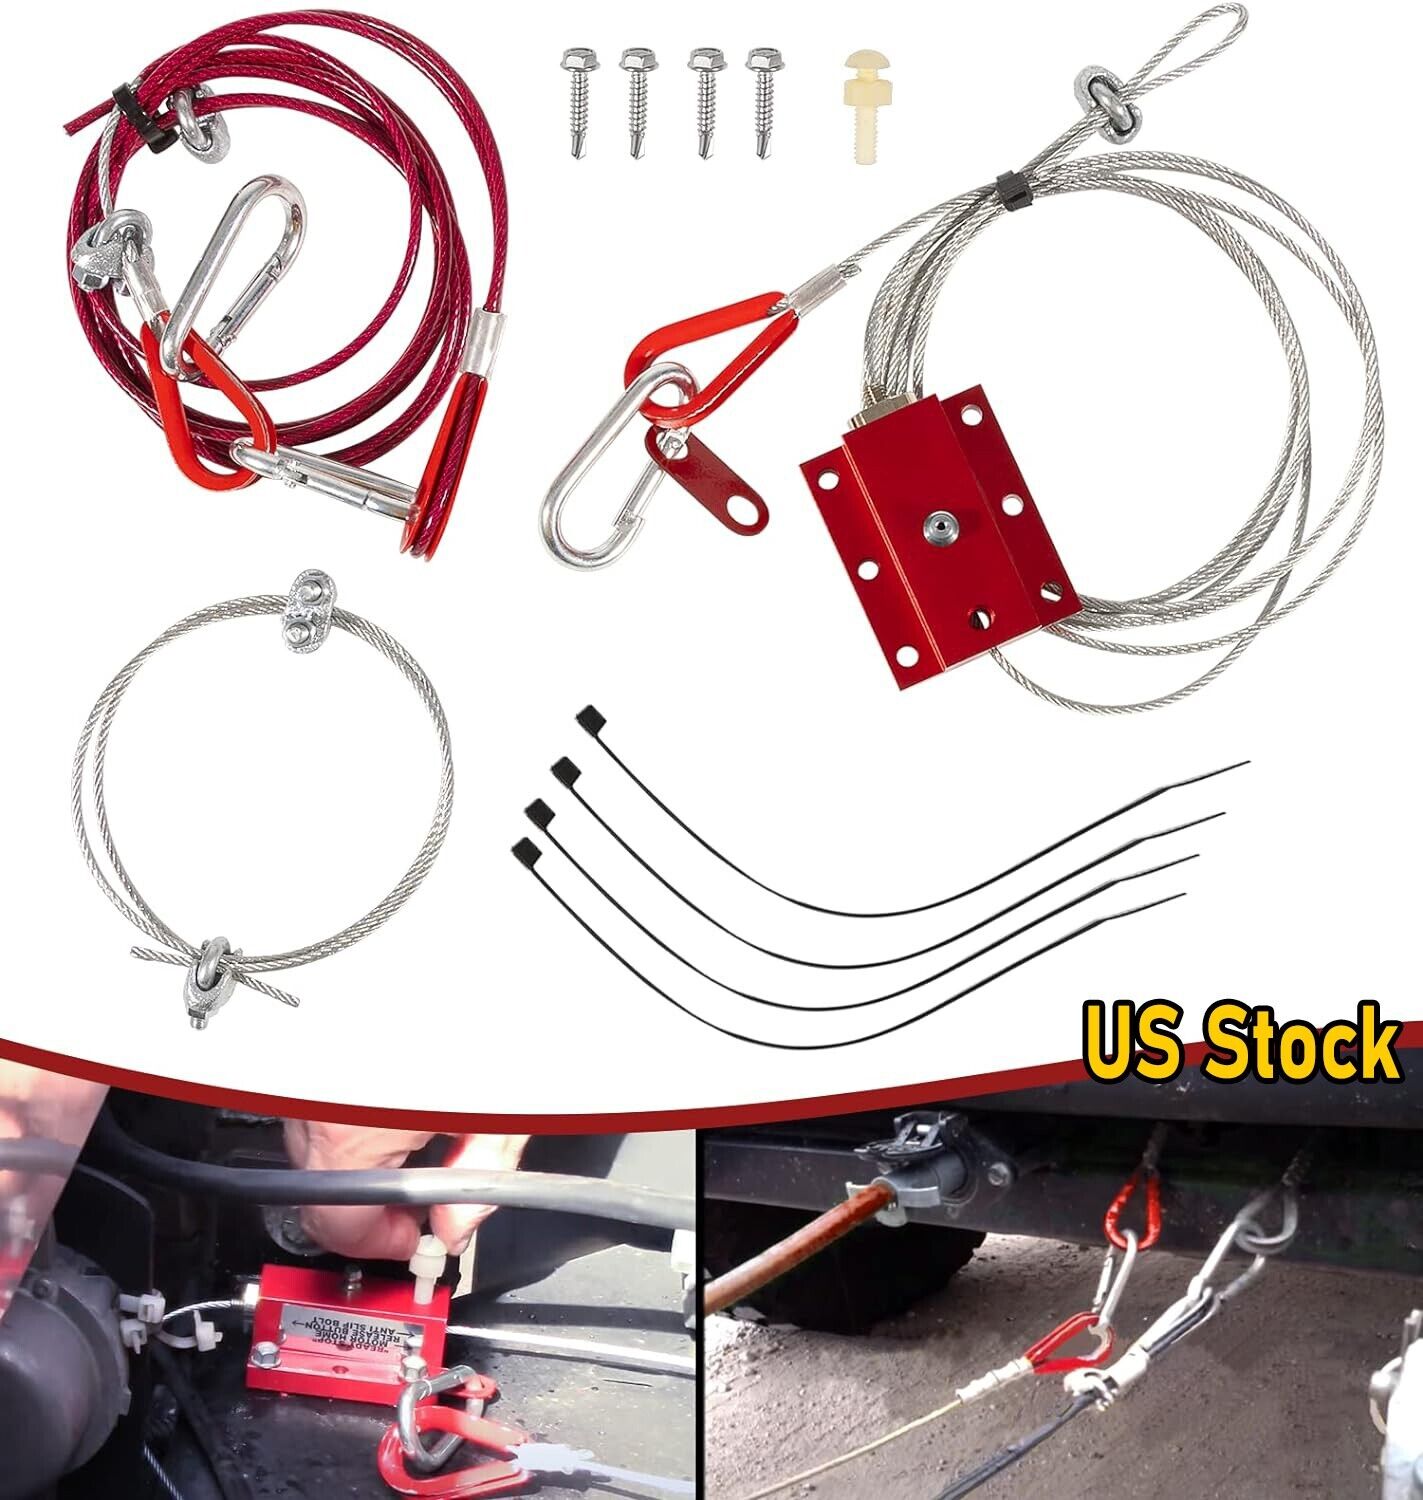 RS-5000 Ready Stop Break Away Device for NSA RV Towed Vehicle Braking Control